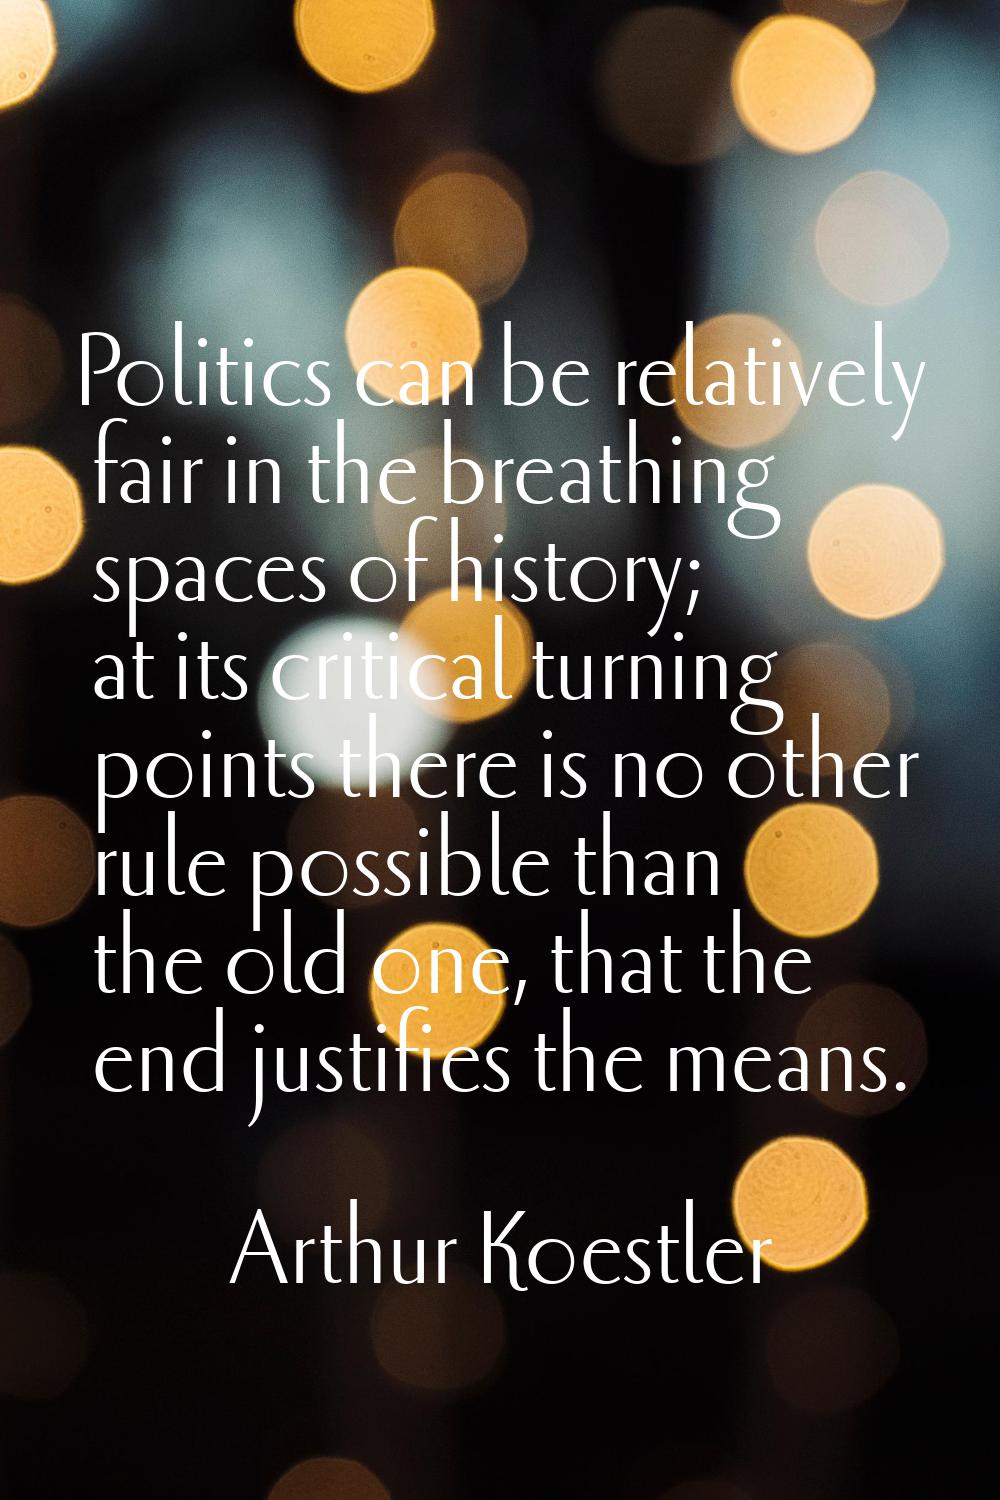 Politics can be relatively fair in the breathing spaces of history; at its critical turning points 